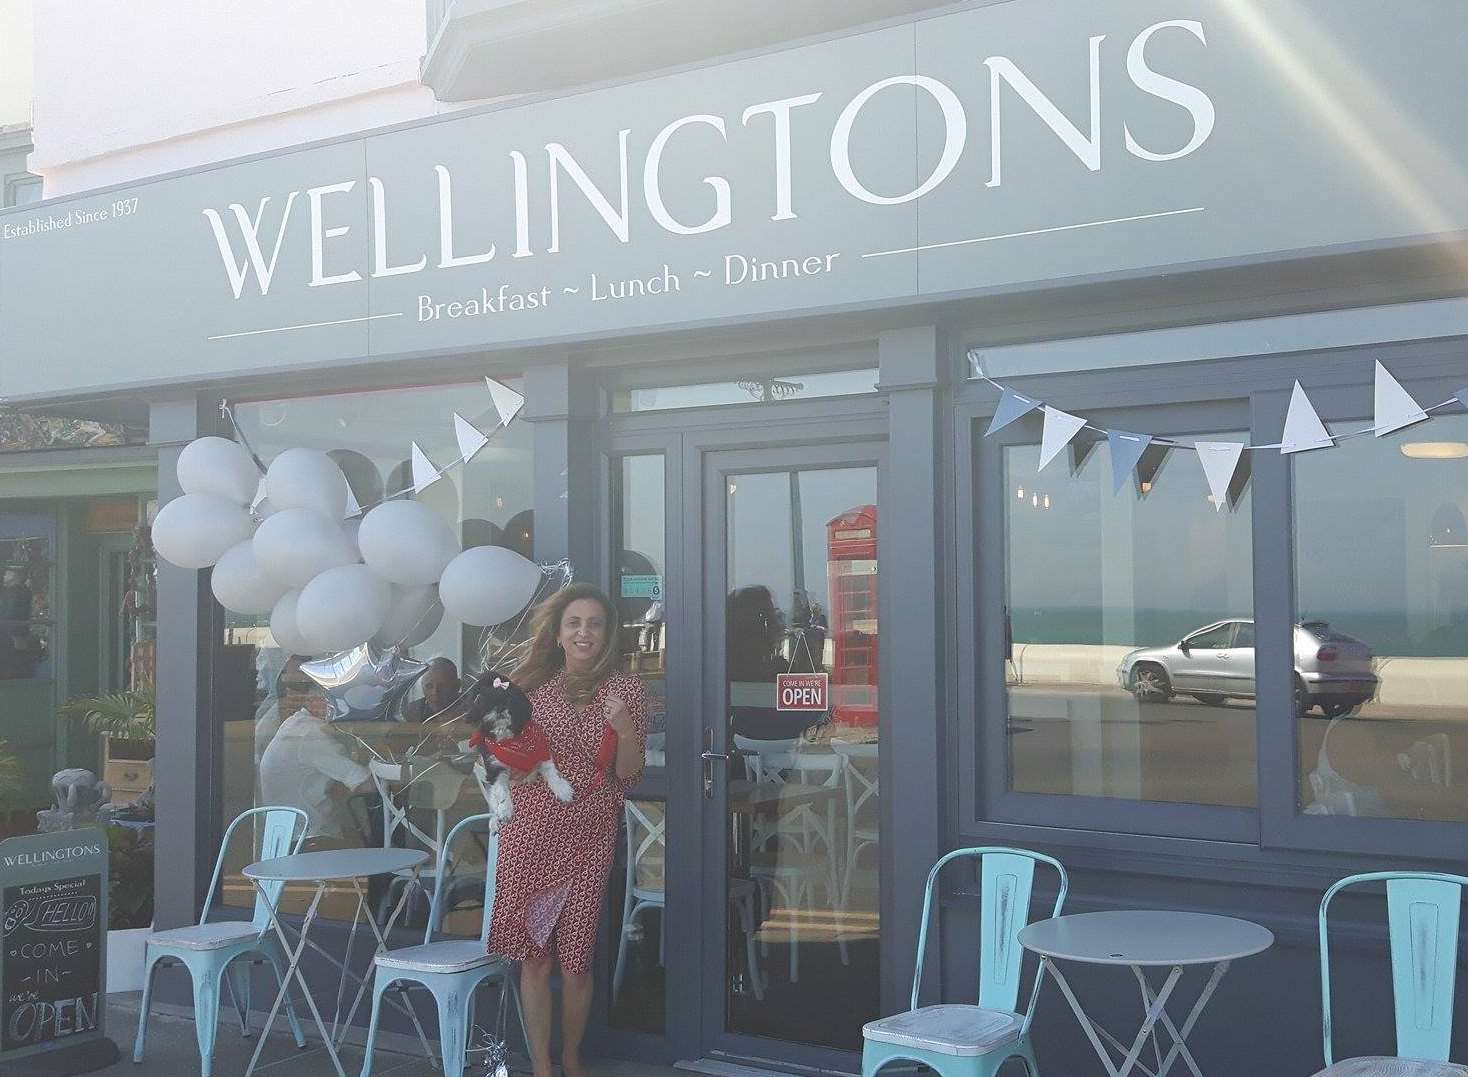 Wellingtons in Deal has reopened its doors after a refurbishment